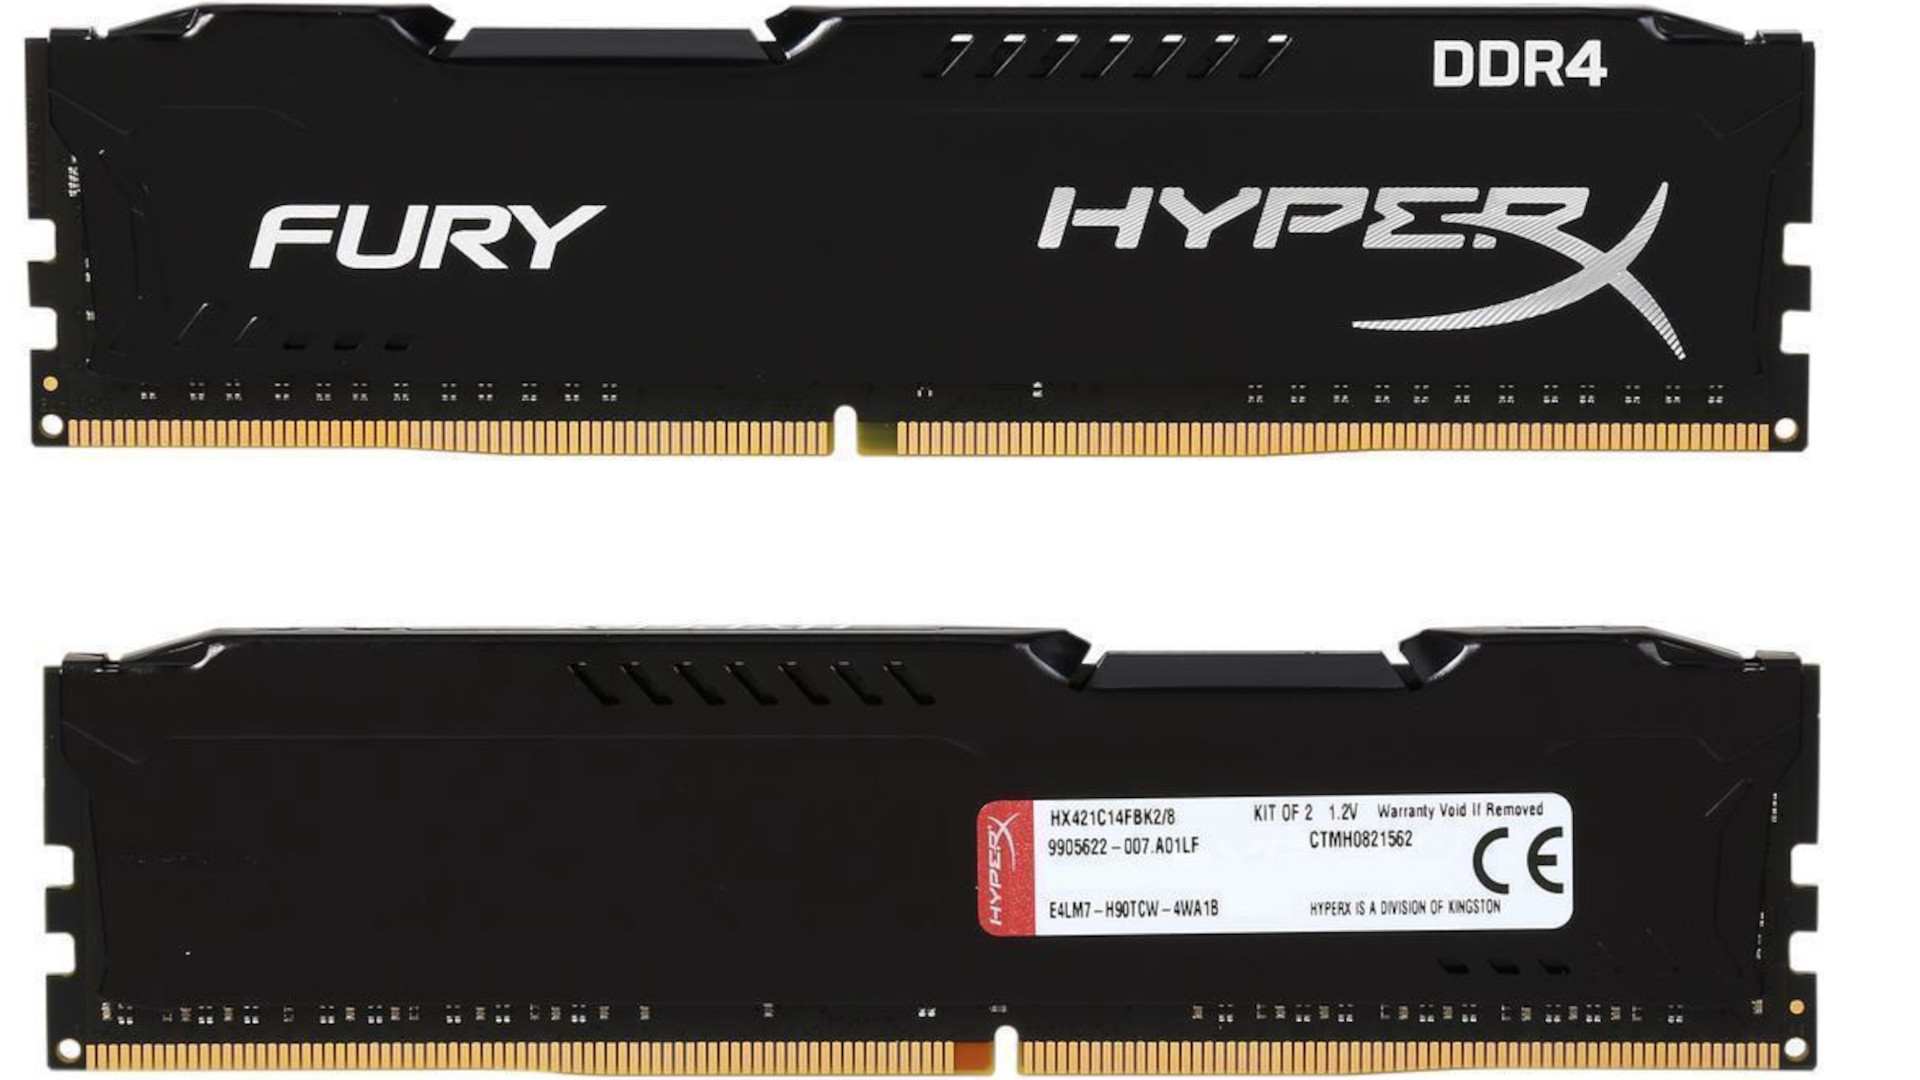 You are currently viewing HyperX Fury DDR4 2133 C14 2x8GB RAM Review